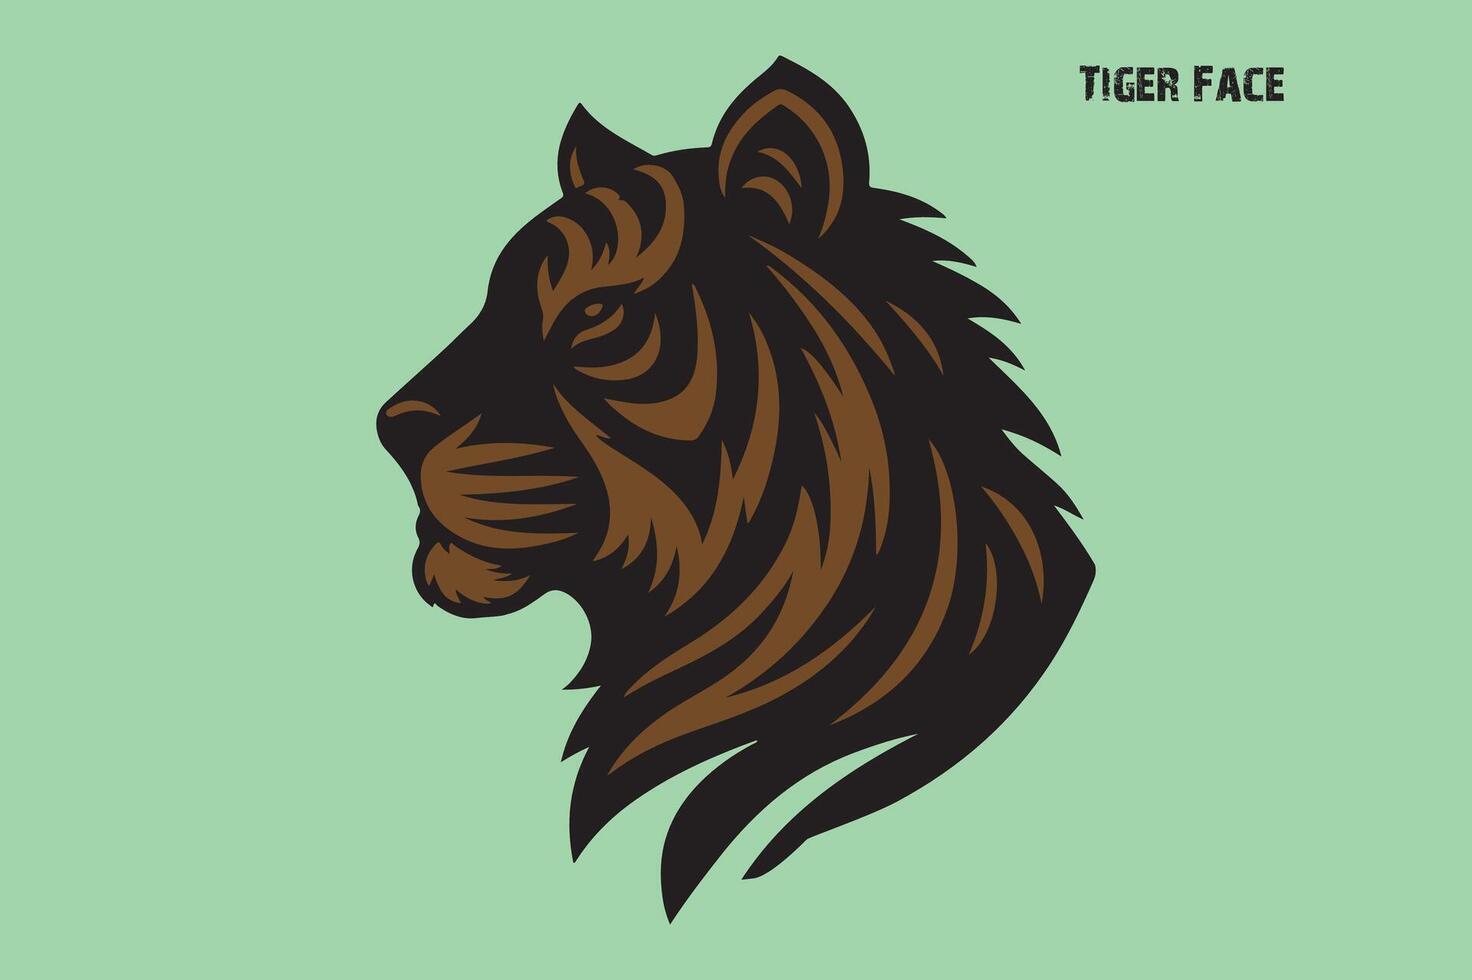 It's a stylish tiger face illustration free Download vector